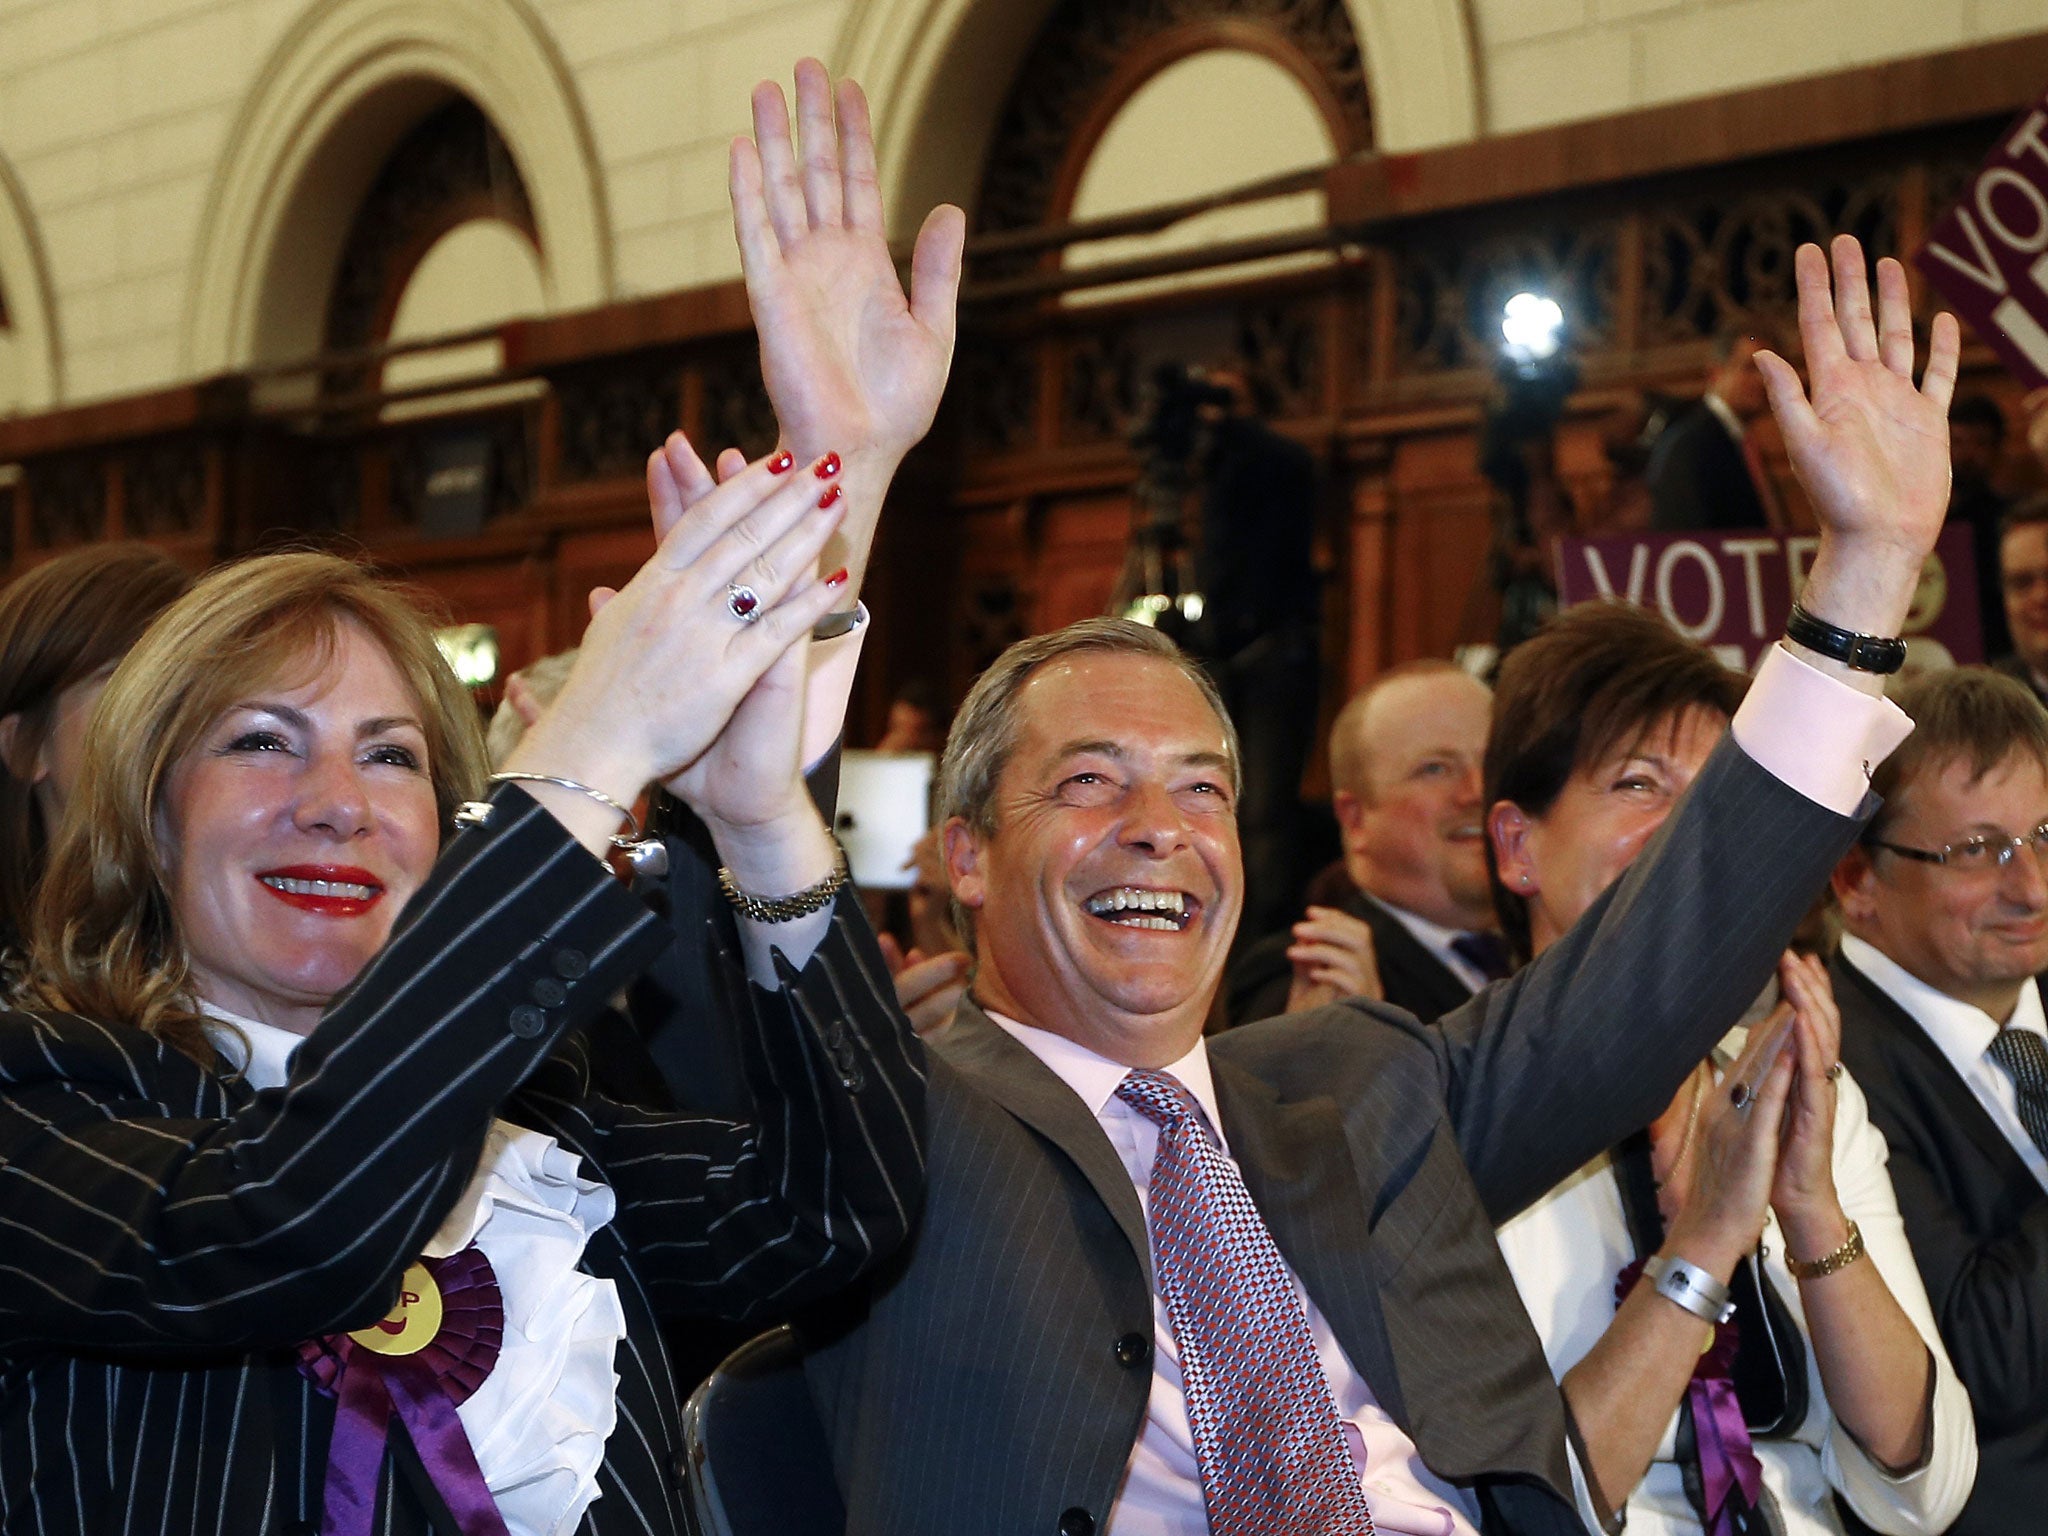 Ukip leader Nigel Farage celebrates with fellow MEP candidate Janice Atkinson, left, as he hears the results